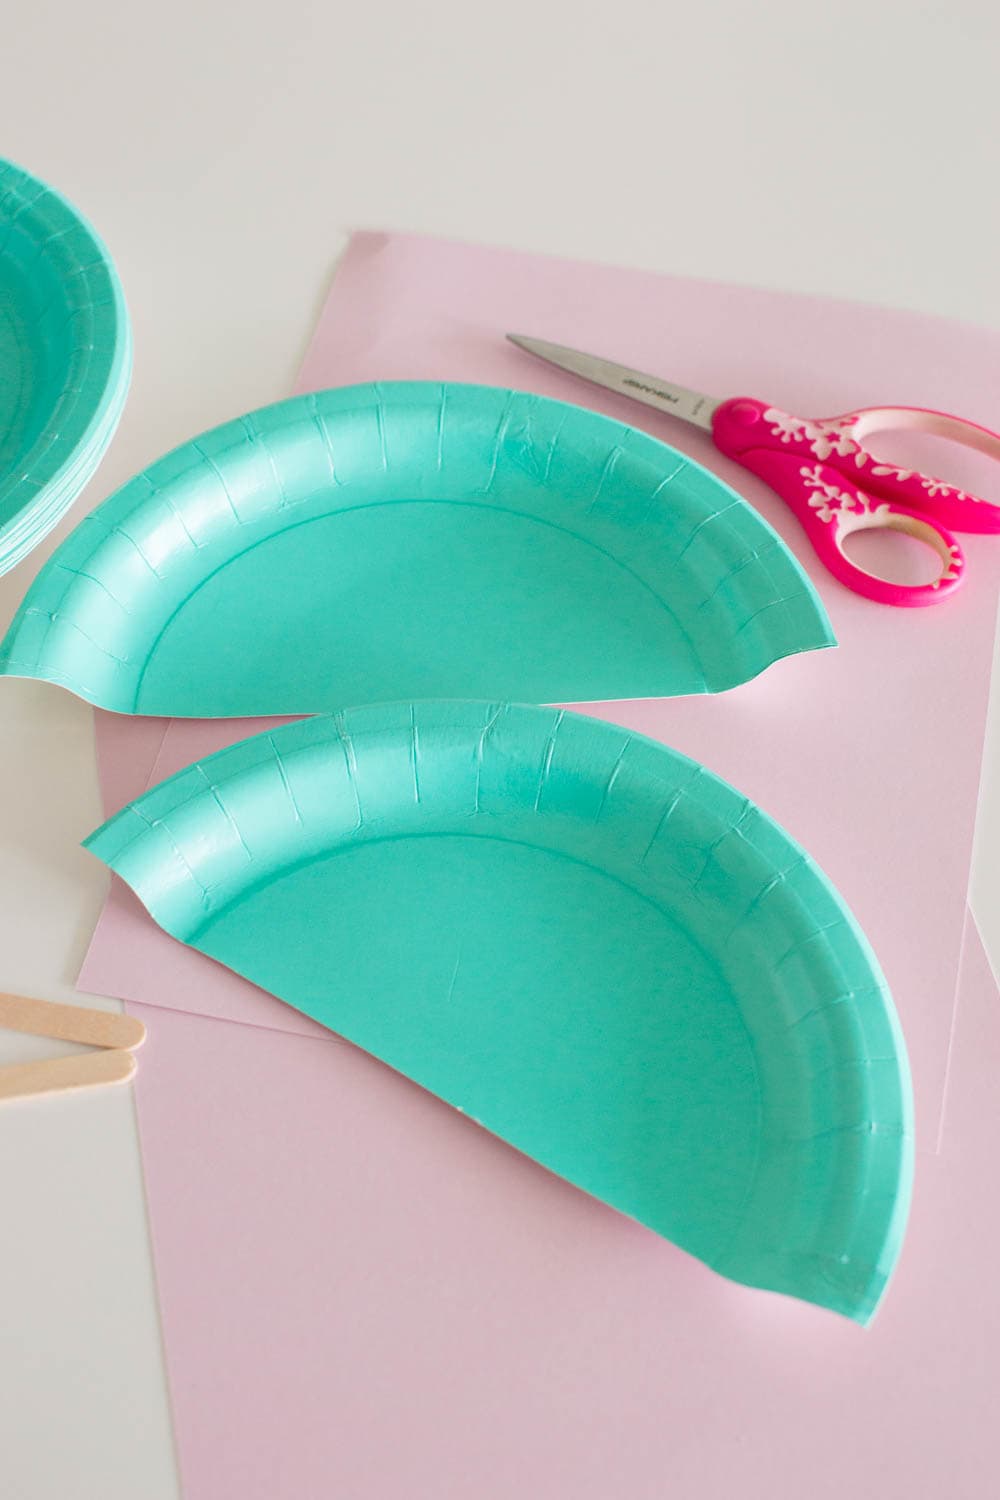 A teal paper plate cut in half with scissors and other craft supplies in the background